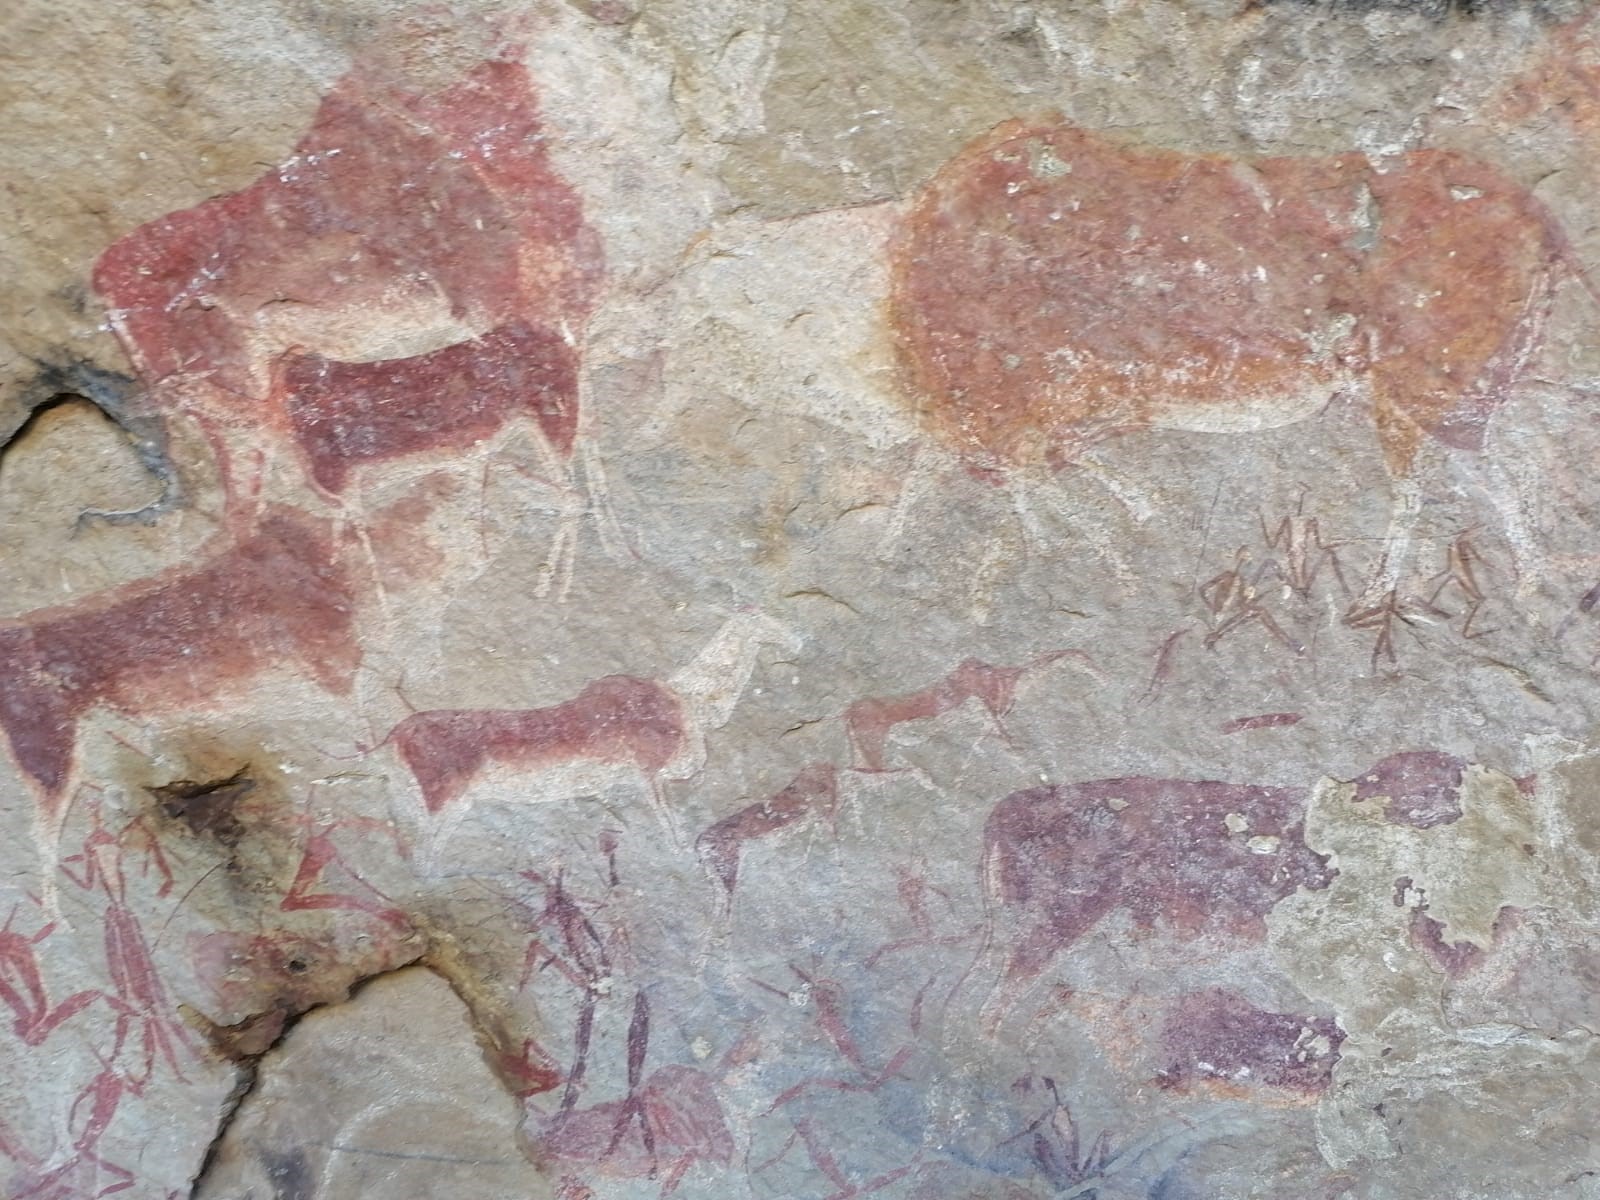 The rock shelter at Ha Soloja is home to a great deal of cave art left over the centuries, including these images of eland, a type of large antelope